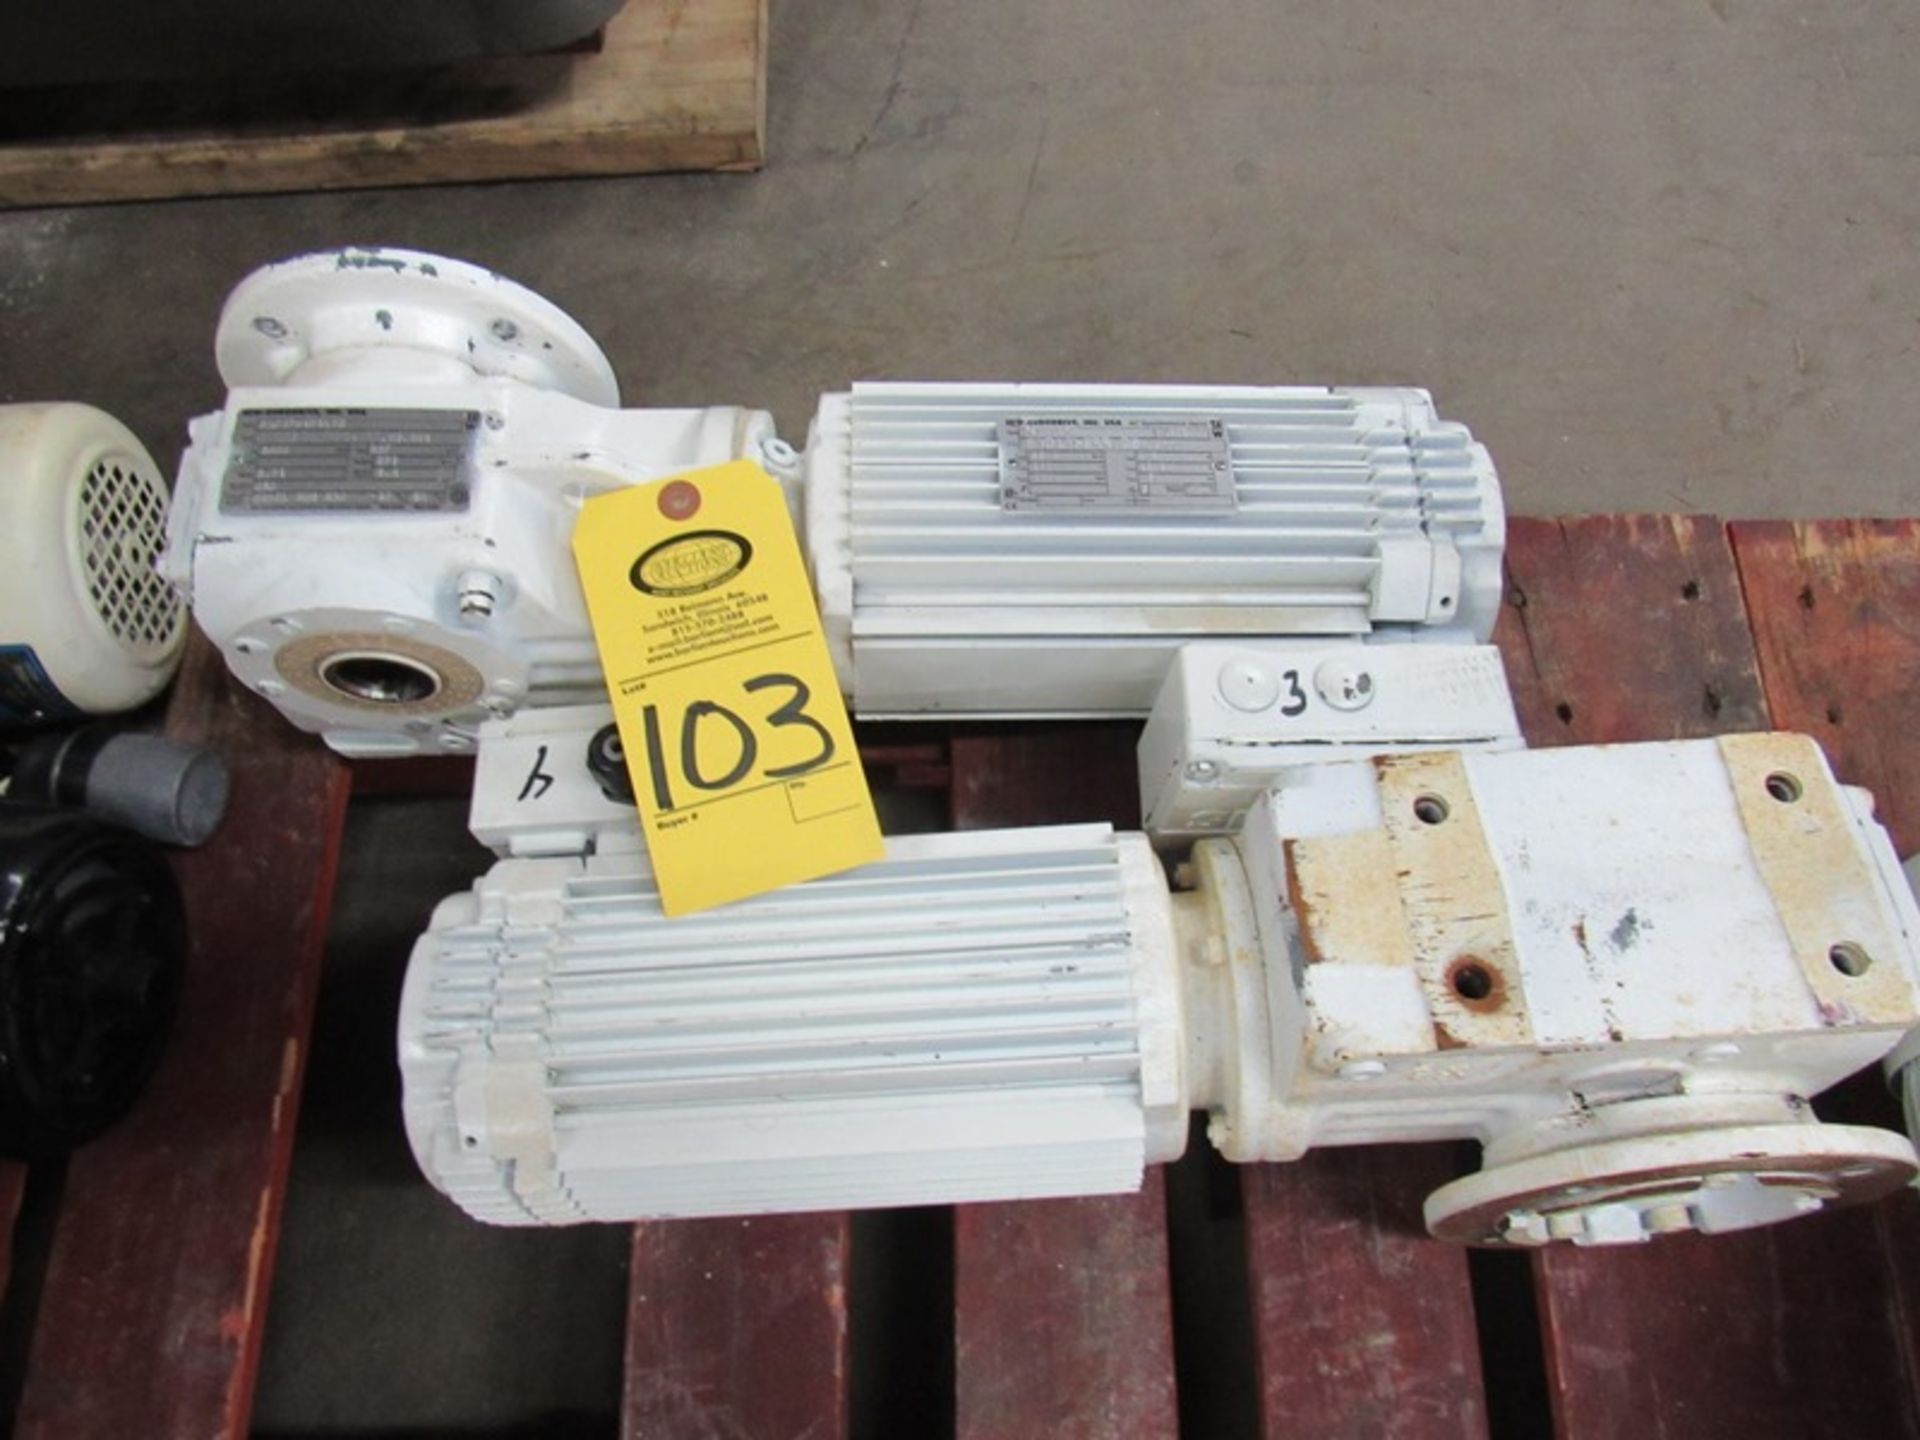 Lot of (2) SEW/Eurodrive Motors/Gearboxes, motor type DFY71LTH, IP 65, T Stall 66.4 Lb- In